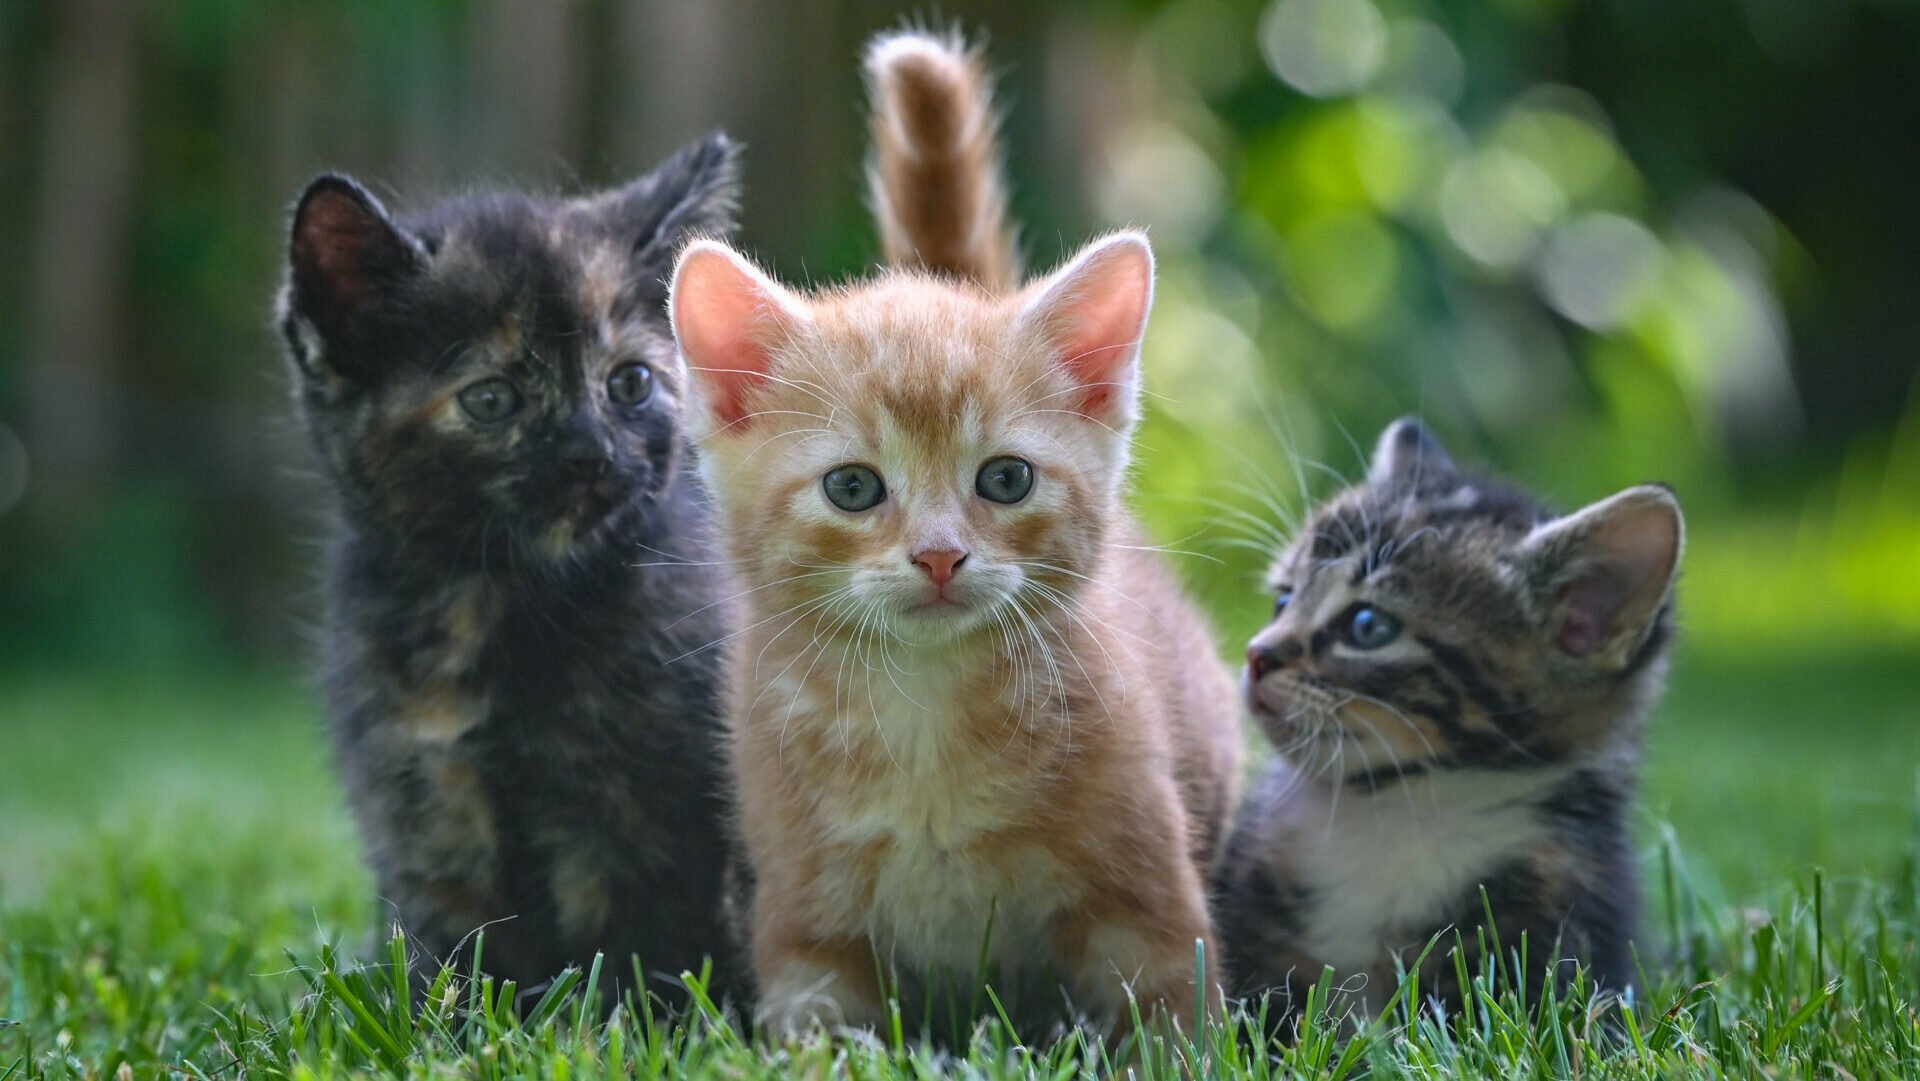 Are You Fostering a Kitten? Scientists Want to Talk to You